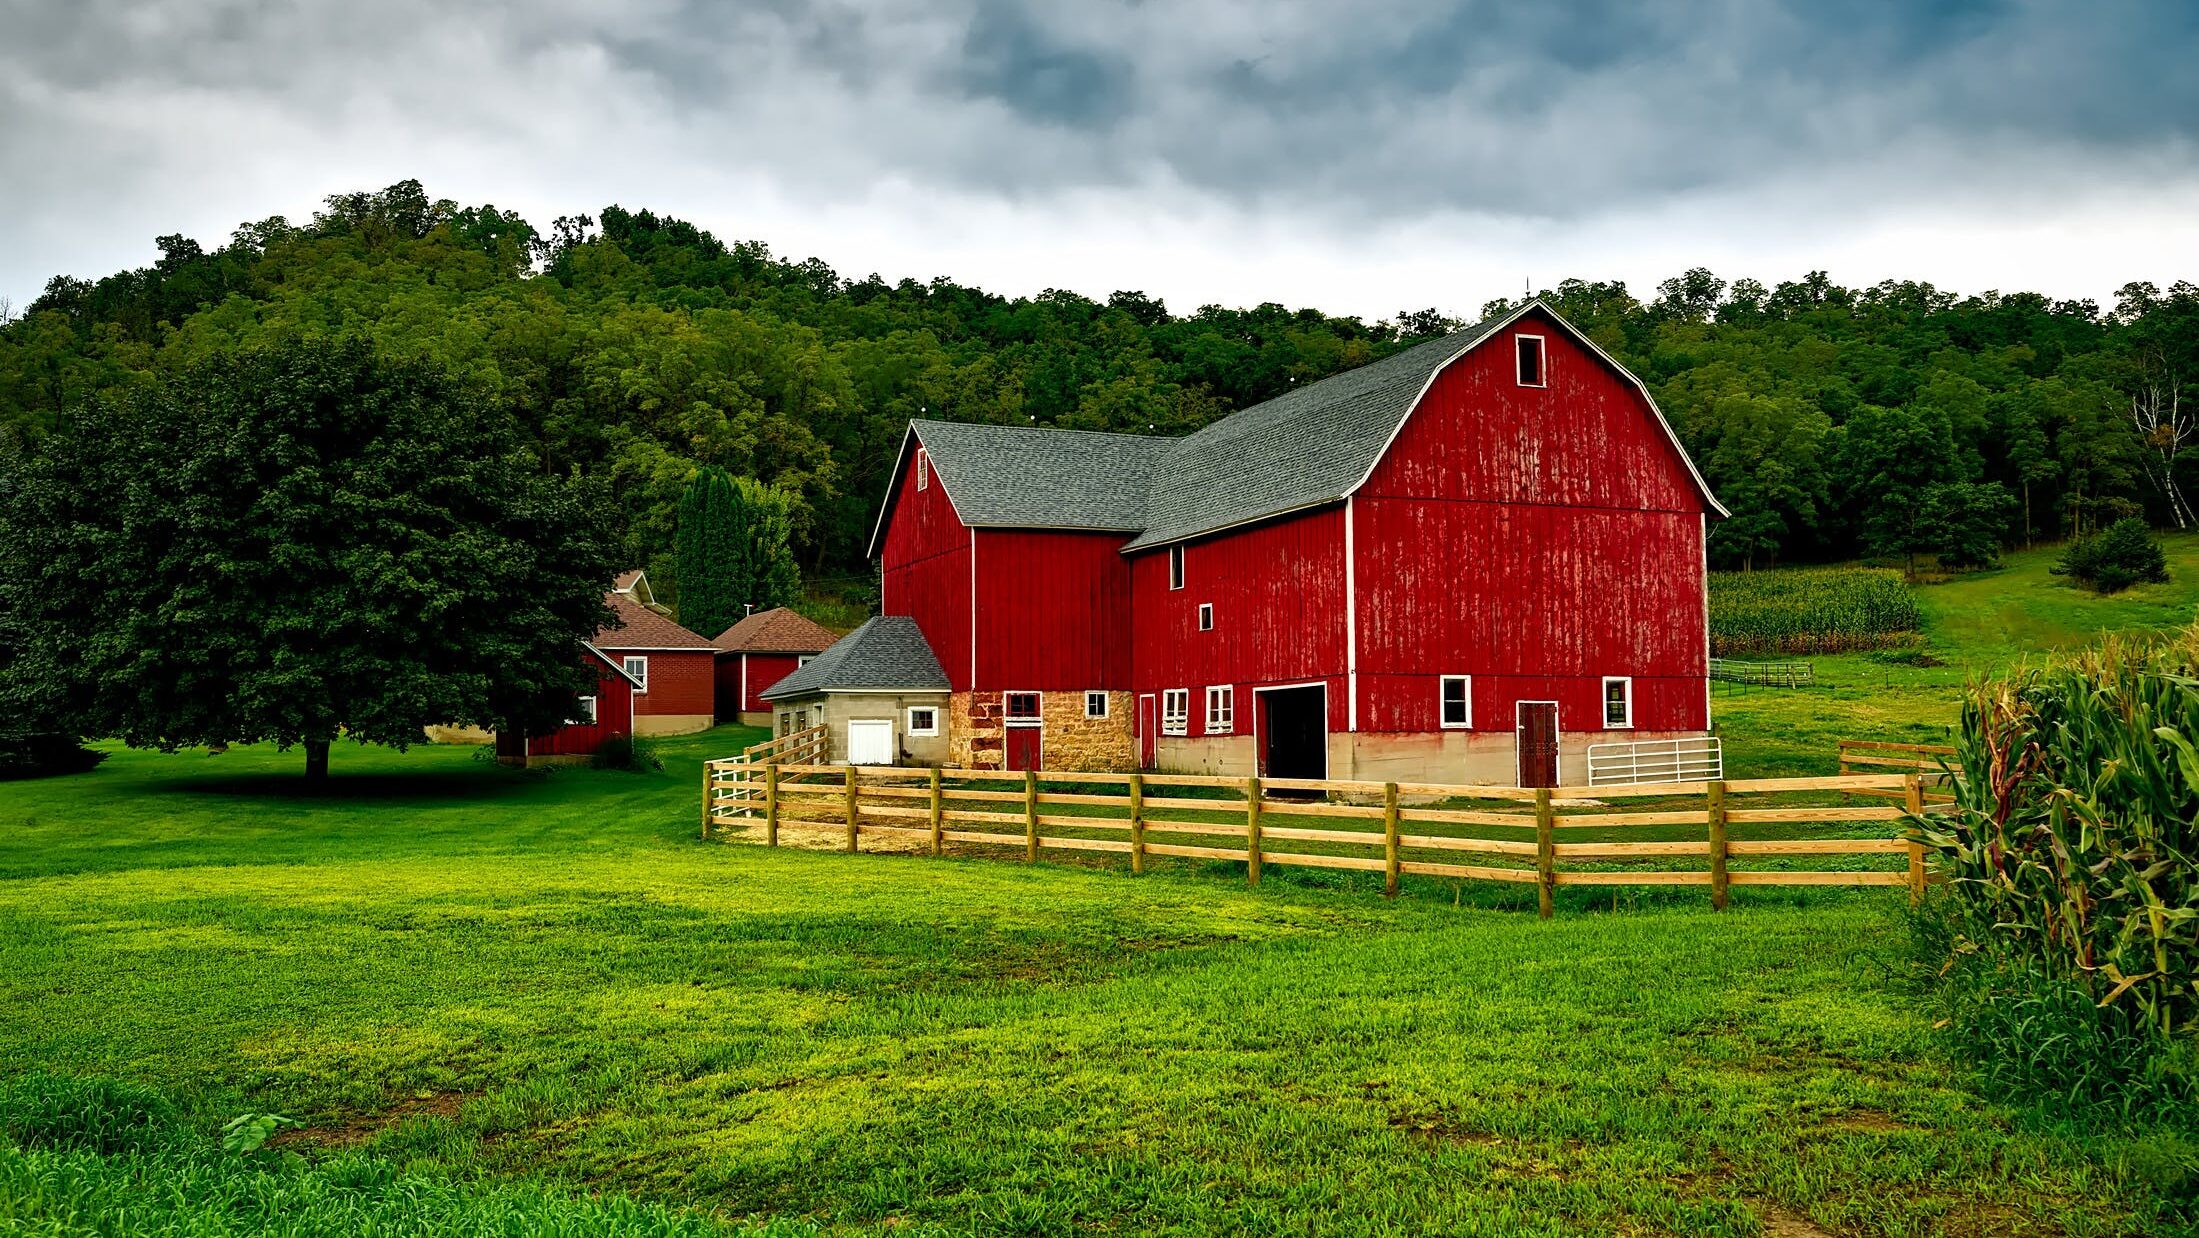 Fenced-in red barn in a field